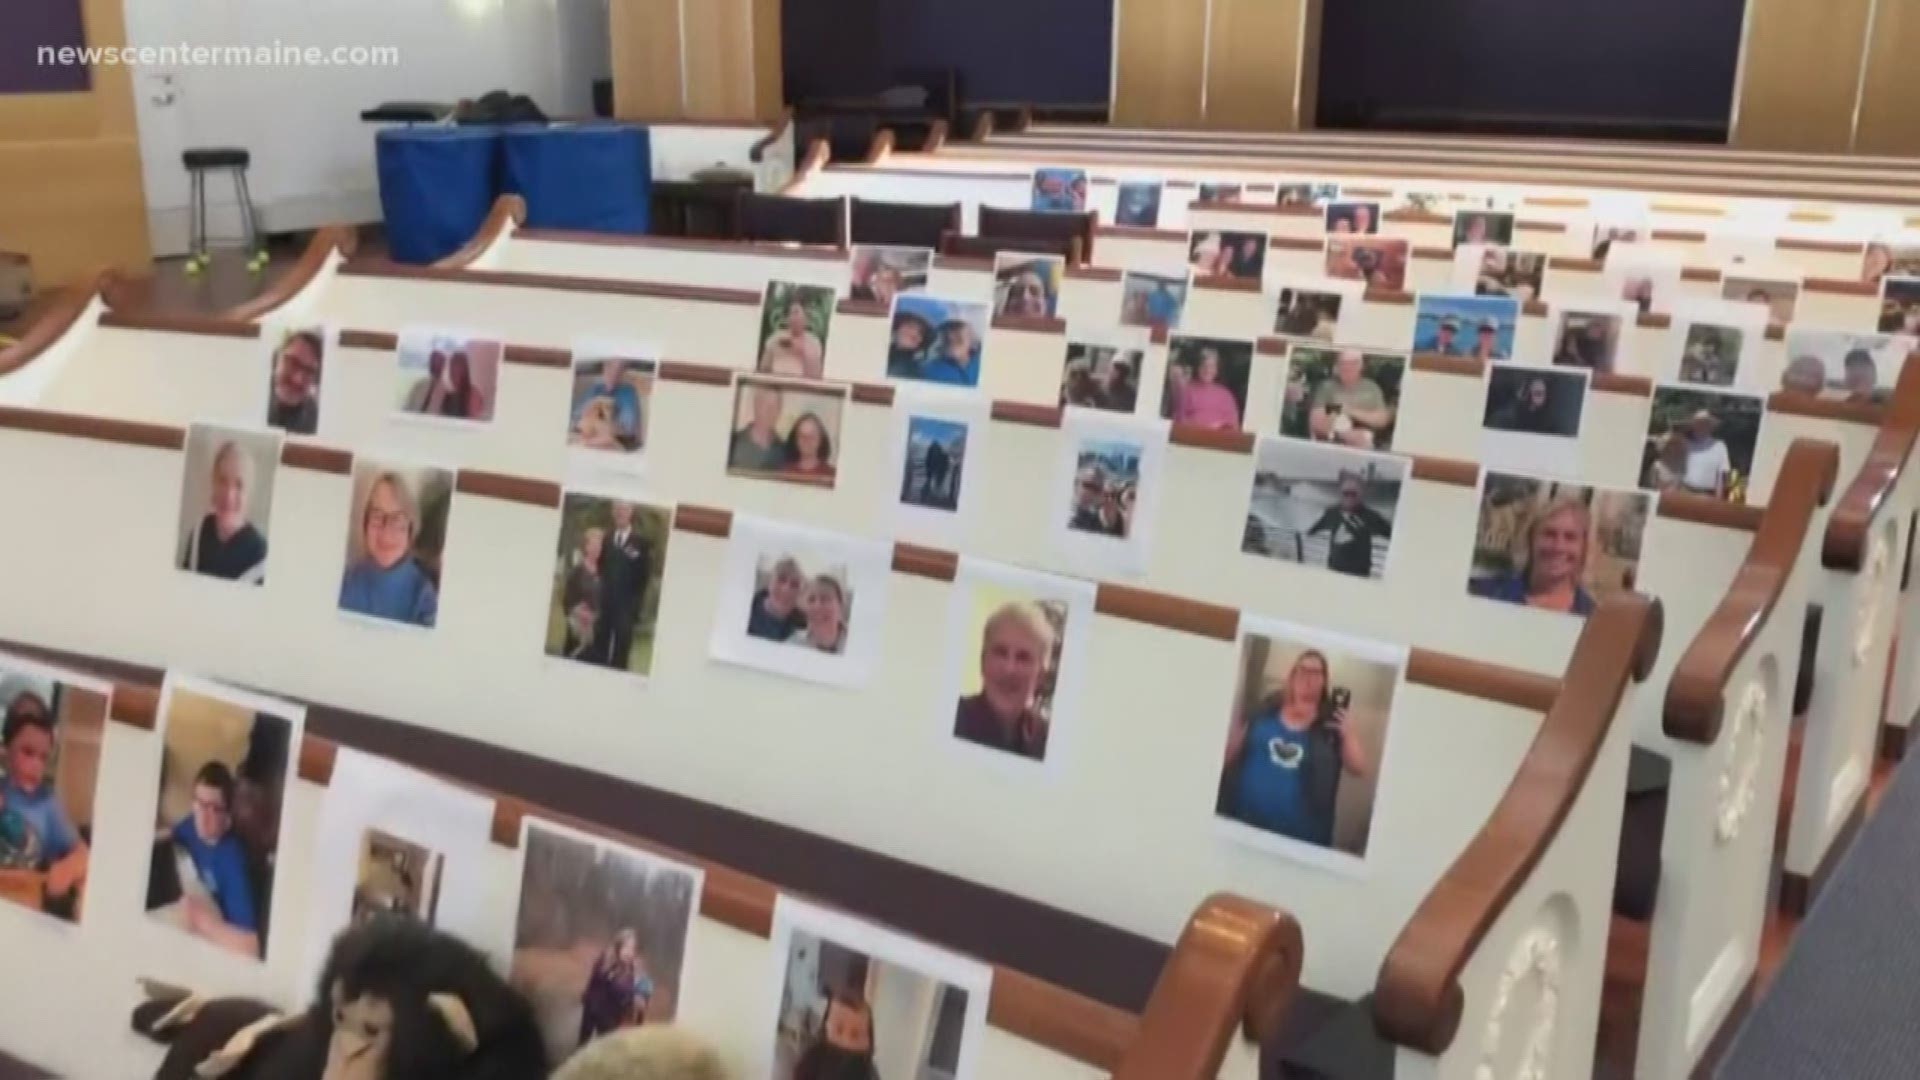 More than 120 printed photos fill the pews at the First Parish Church in Saco during streaming services.